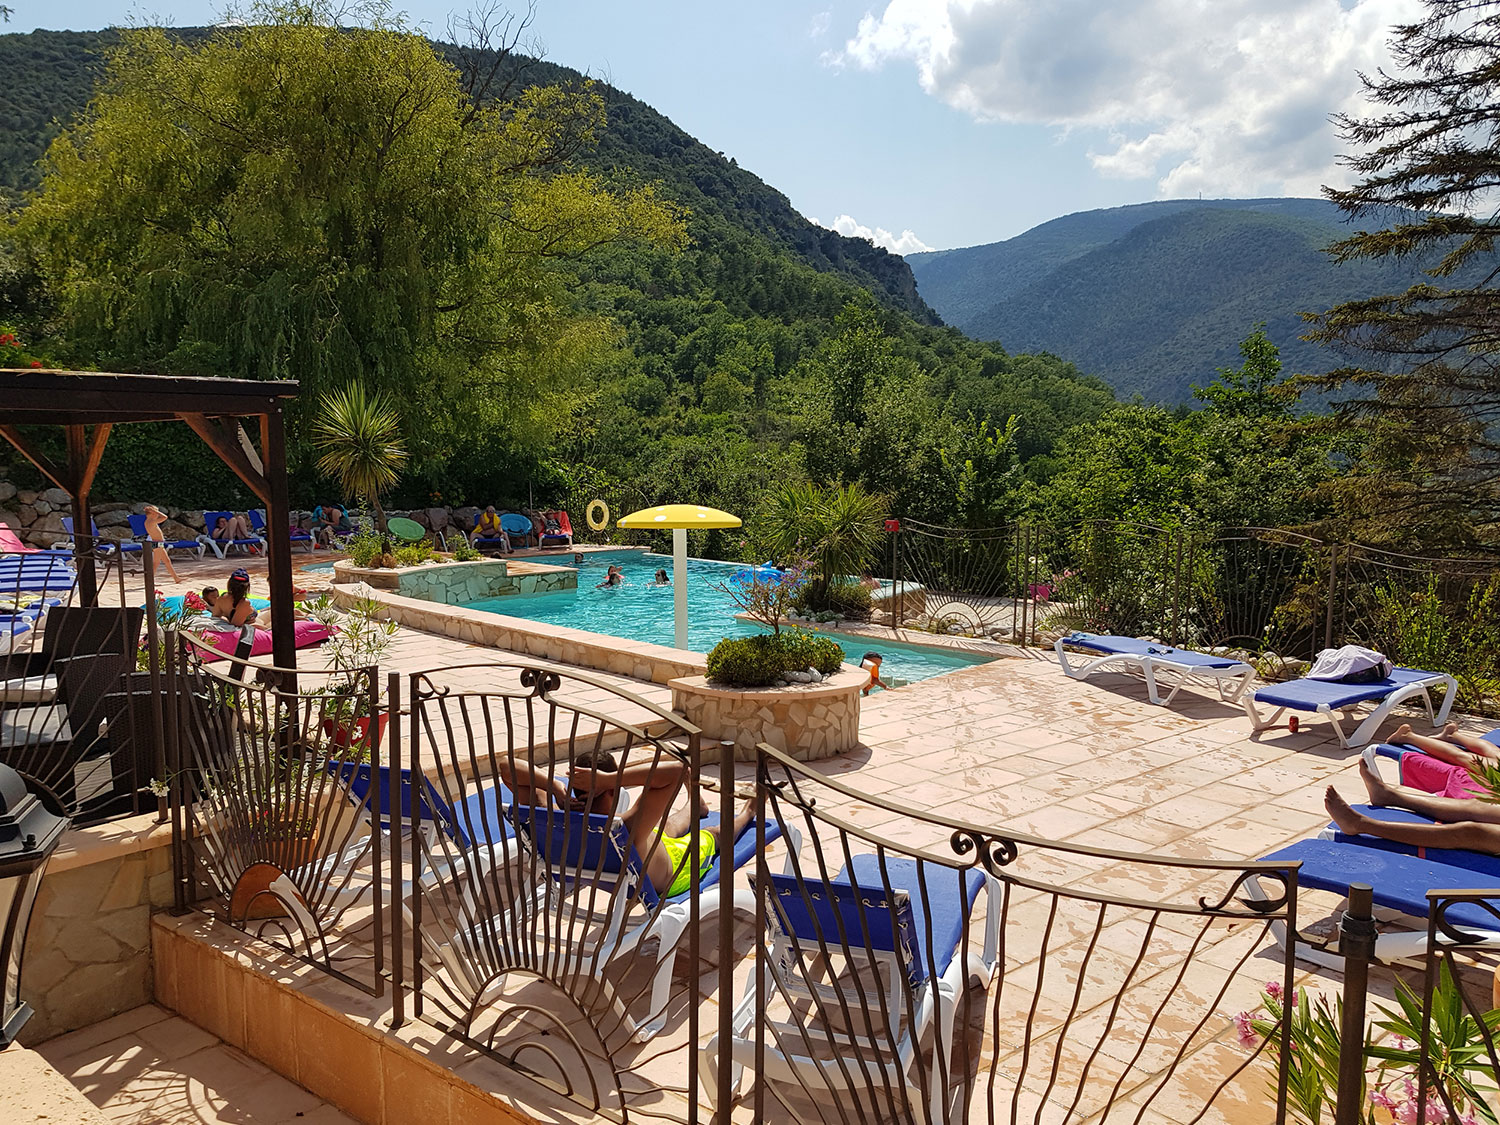 camping ria-sirach,villefranche de conflant,pyrennee orientale,camping 2 etoiles,camping villefranche,camping prades,camping ria-sirach,ria sirach pyrénées orientales,ria sirach,camping prades,camping 2 etoiles,camping 2  etoiles,tourisme,locatif,emplacement,tente,caravane,camping car